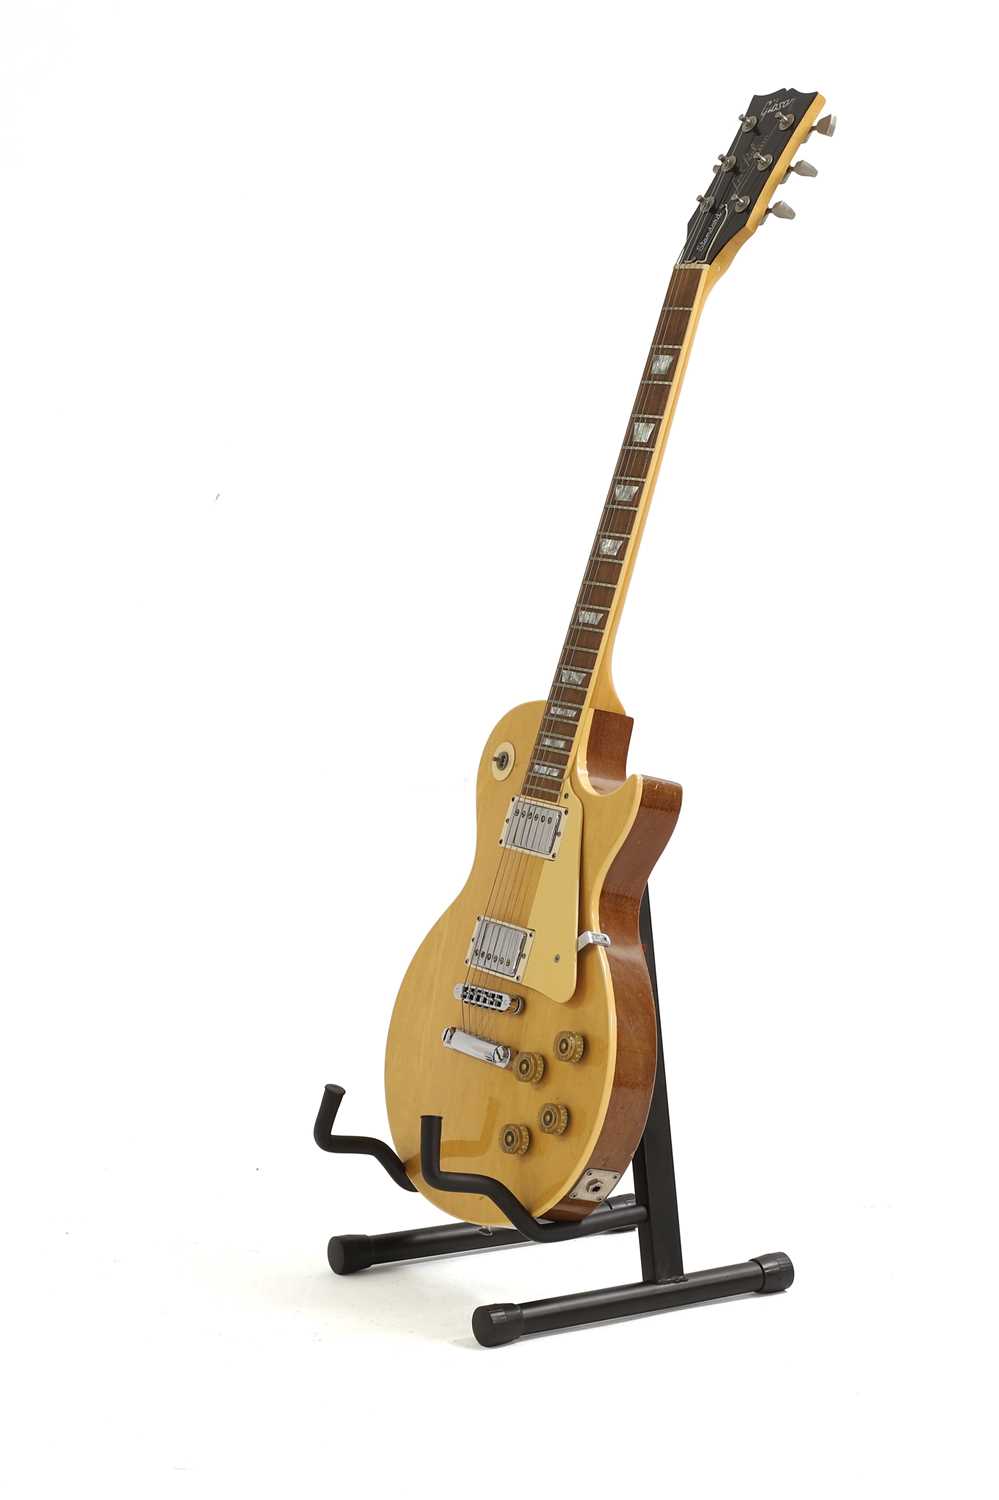 A 1979 Gibson Les Paul 'Standard' electric guitar, - Image 5 of 14